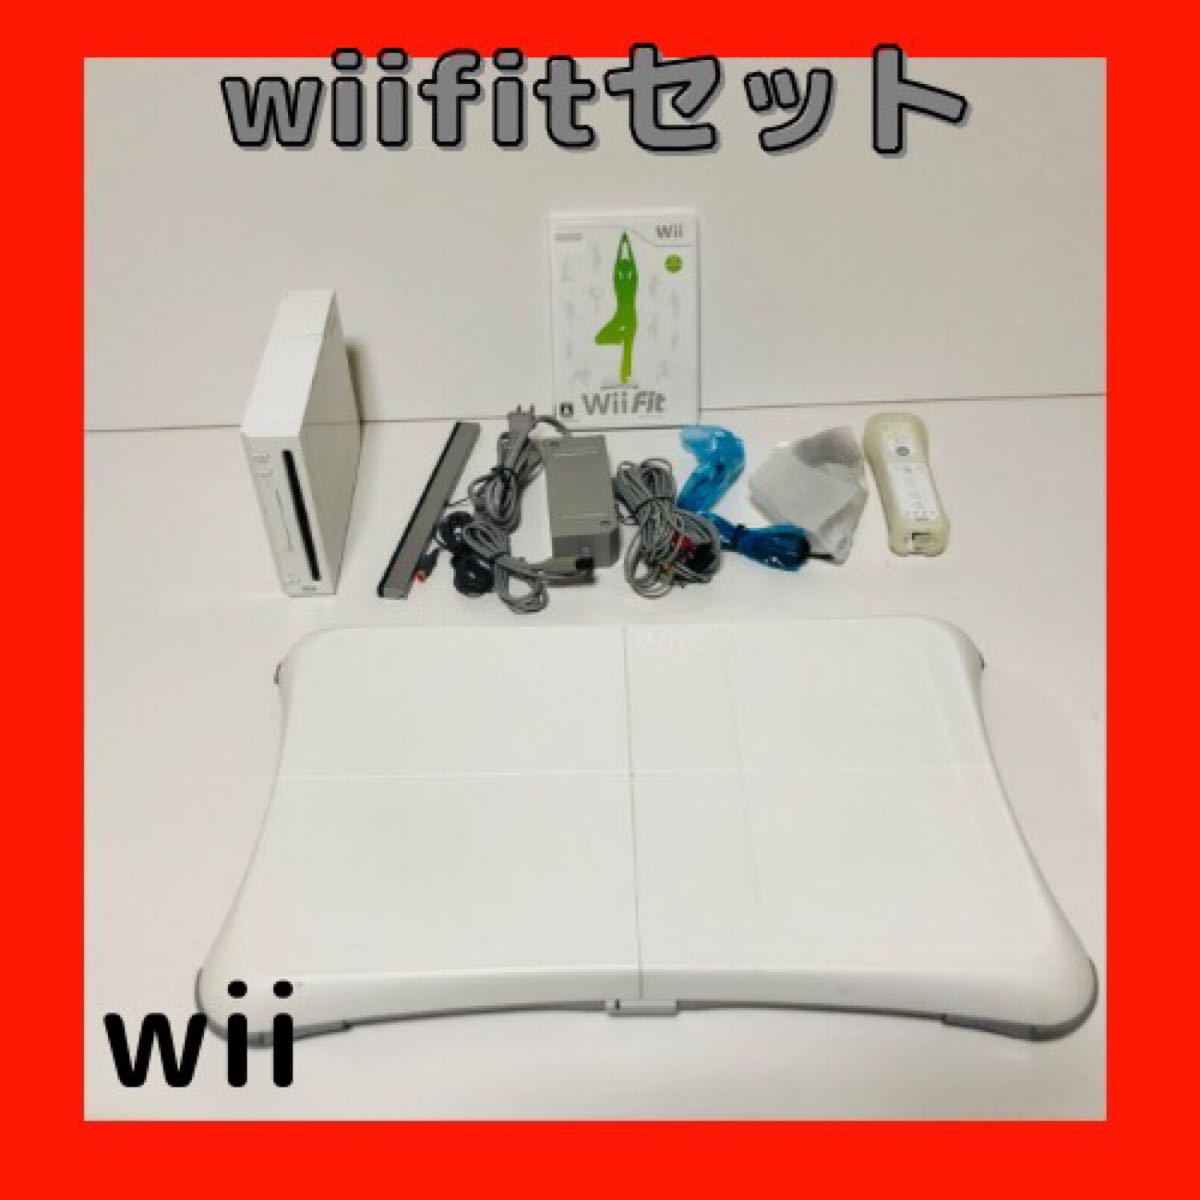 Wii +Wii Fitセット 動作品 【すぐに遊べるセット】Wii Fit バランス